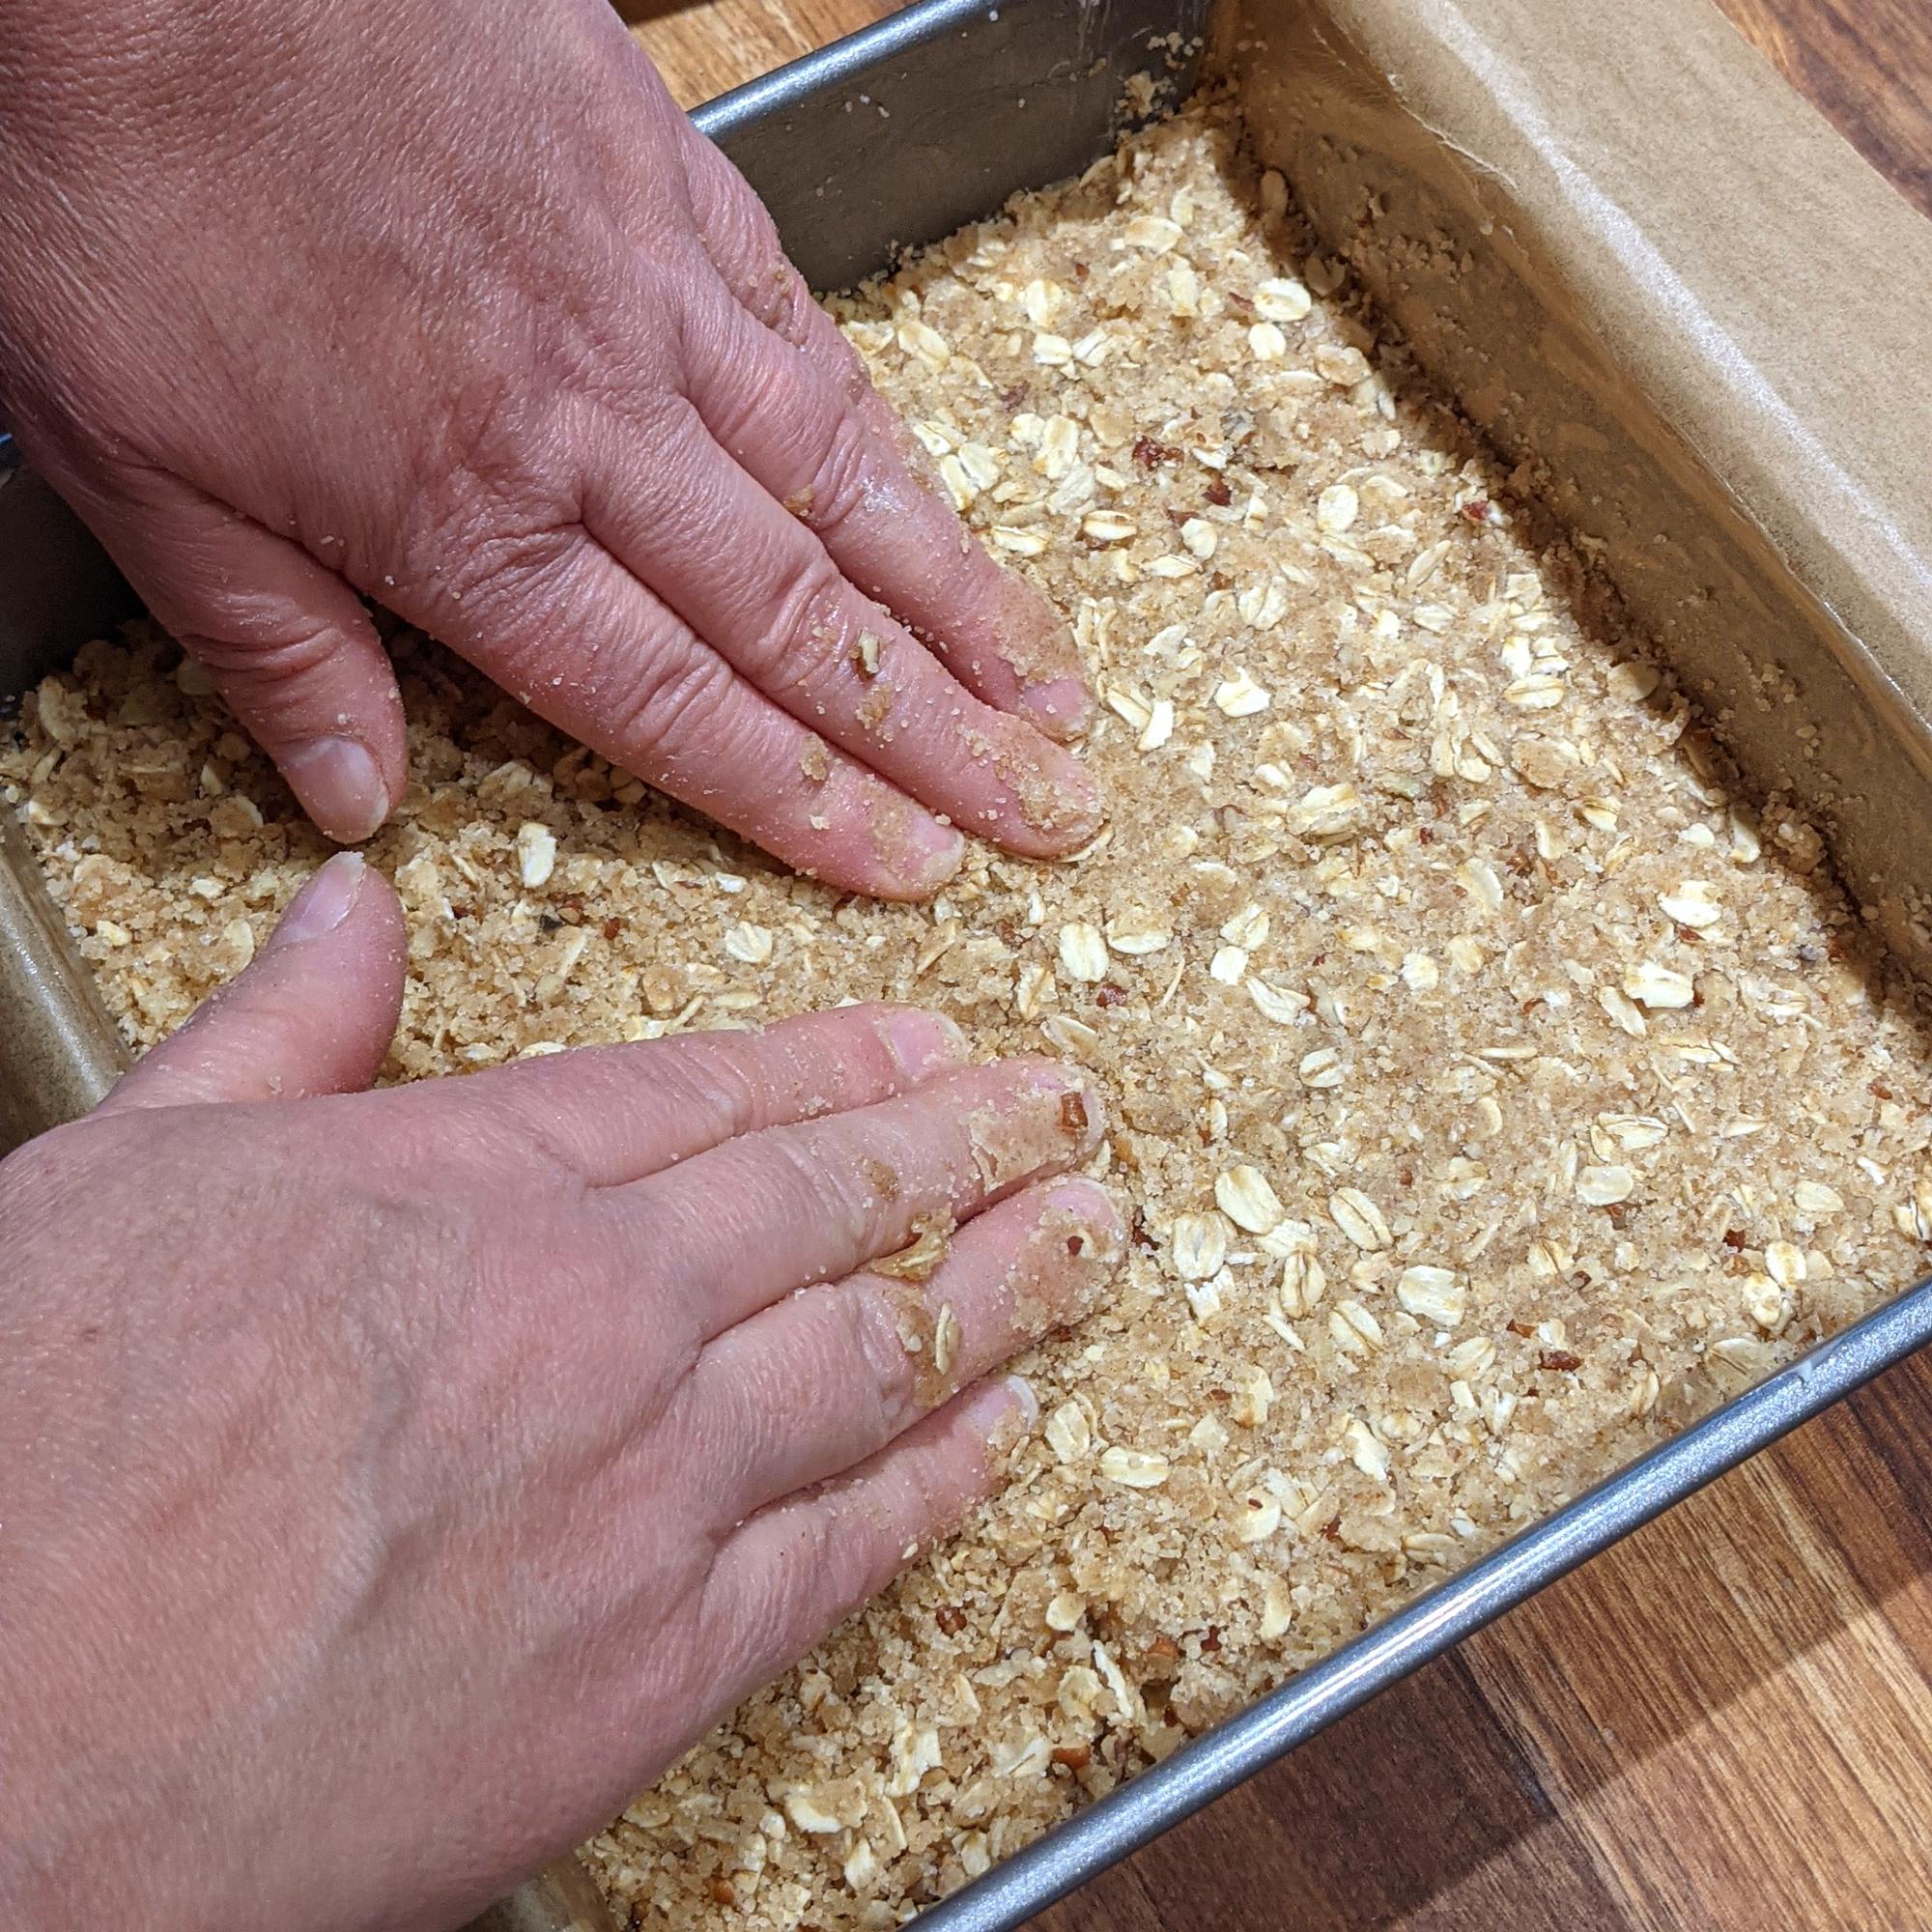 Pressing the crumb mixture into the pan.